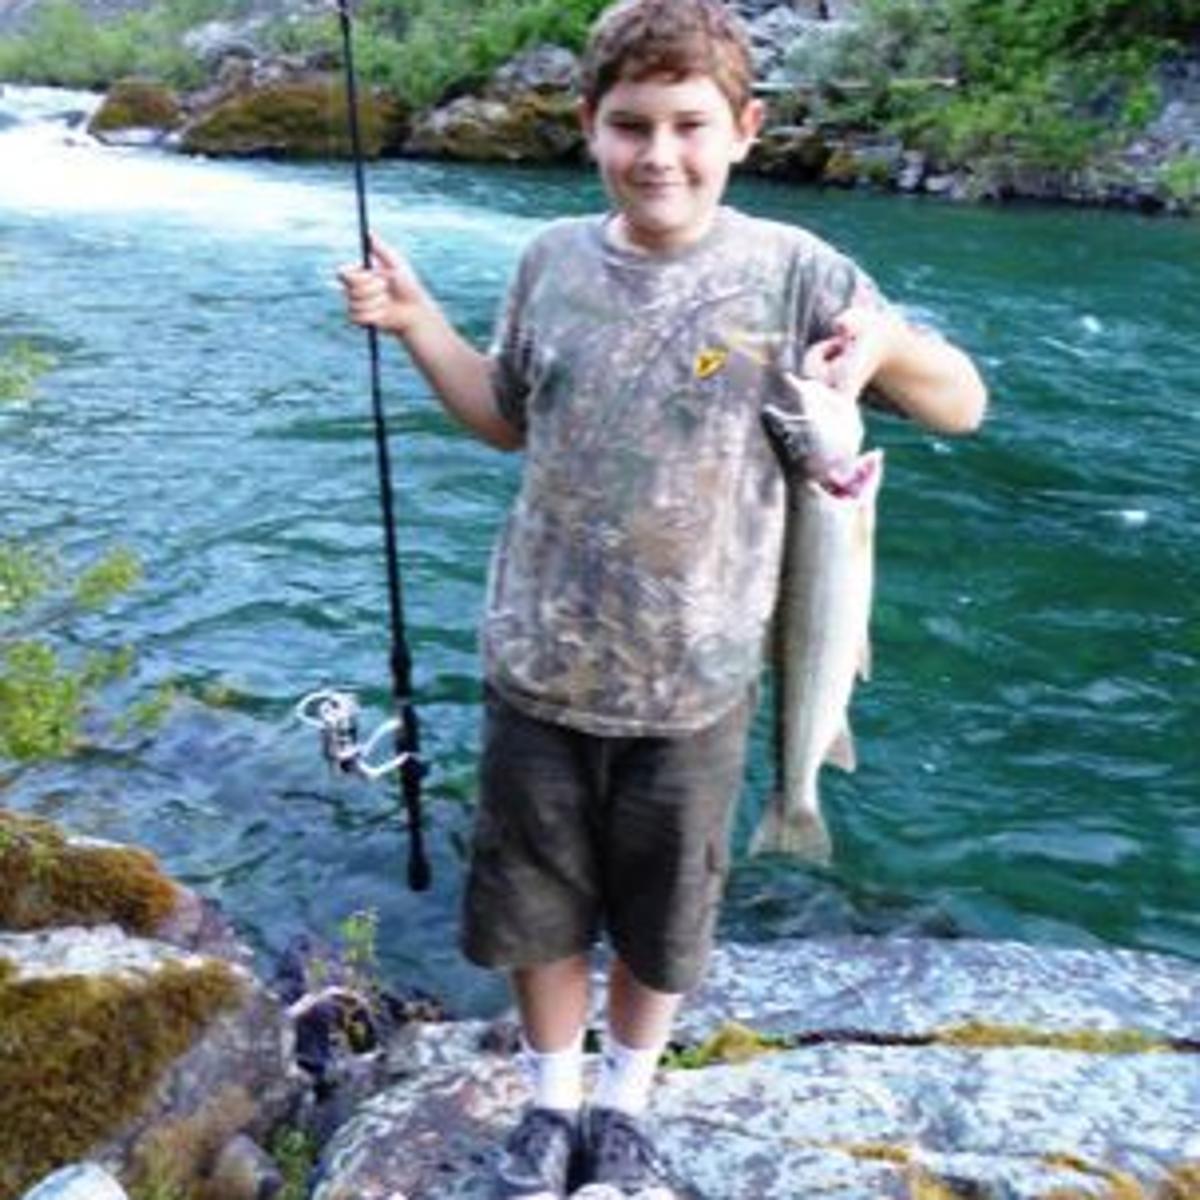 Napa Valley Fishing Report Young Anglers Catch Trout And Kokanee